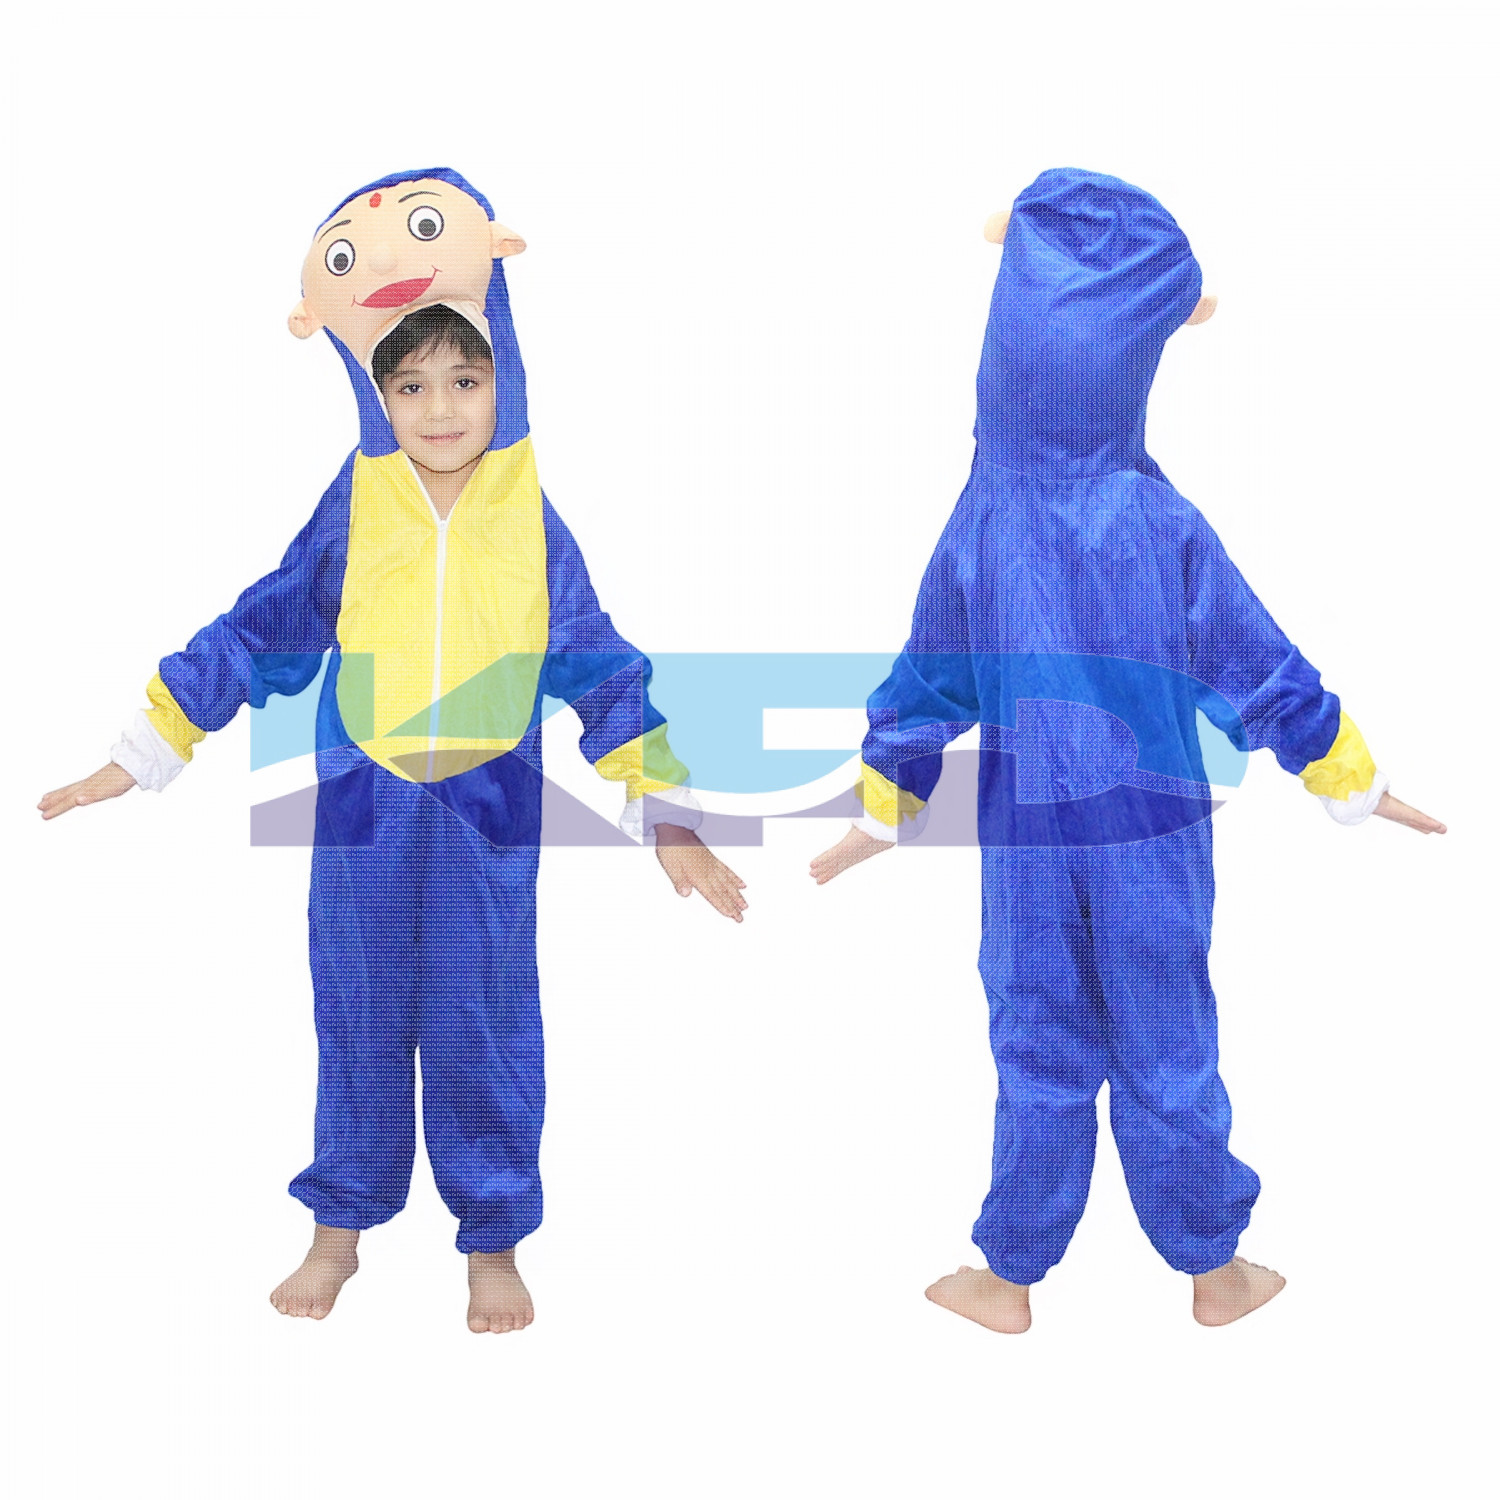 Hattori Cartoon Fancy dress for kids,Costume for School Annual function/Theme Party/Stage Shows/Competition/Birthday Party Dress